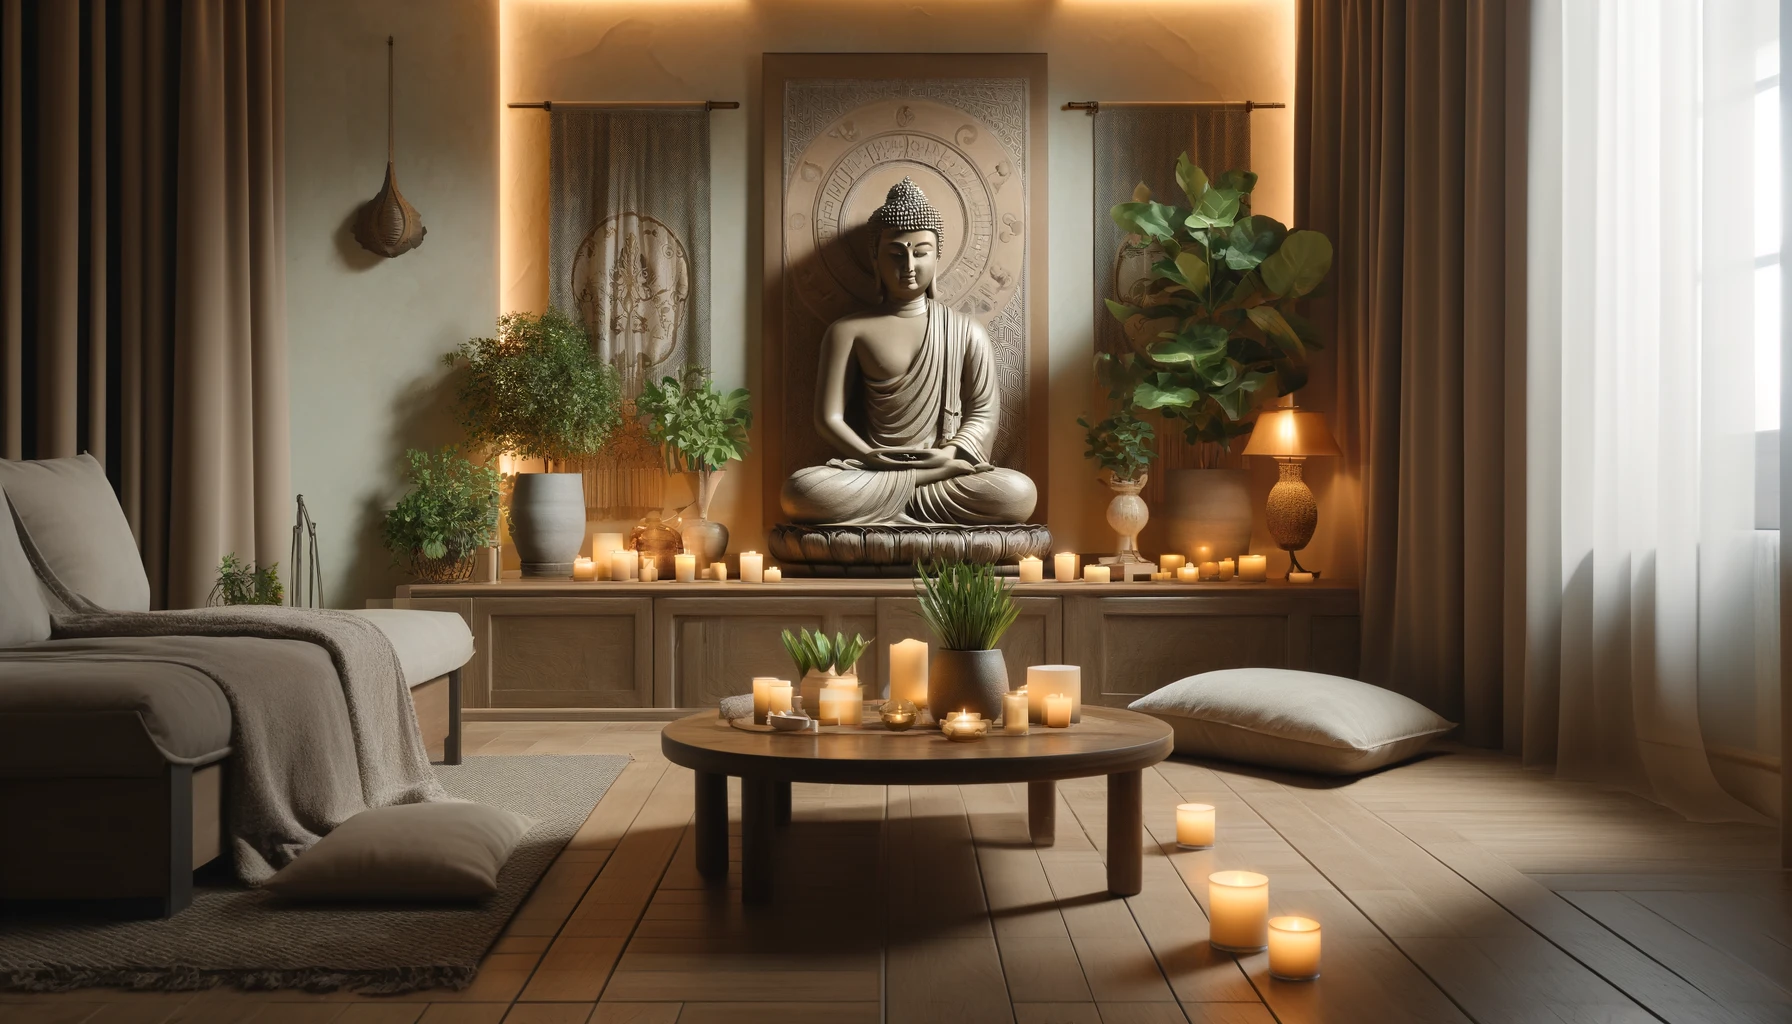 A serene and tranquil home decor scene featuring a Buddha temple theme. The room has a soft color palette with earth tones. There is a large statue of Buddha in a meditative pose, surrounded by small, flickering candles and fresh green plants. The furniture includes a low, wooden coffee table and comfortable cushions on the floor for sitting. There are also hanging tapestries with Buddhist motifs and a gentle waterfall feature in the background, creating a soothing sound. The lighting is soft and warm, adding to the peaceful ambiance.